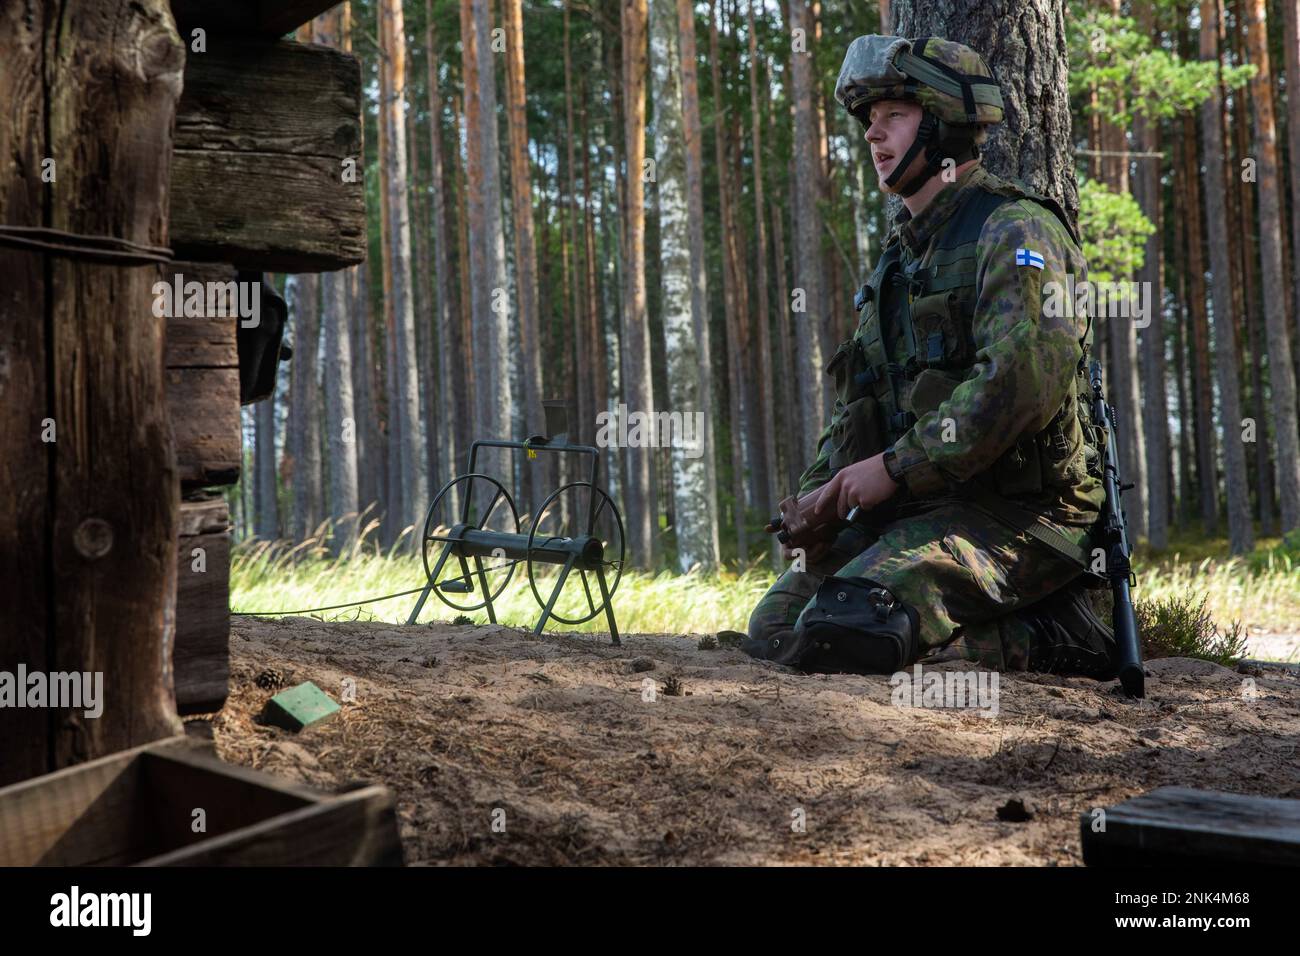 A Finnish Soldier from Nyland Brigade prepares a charge during demolition training with U.S. Marines assigned to Combat Logistics Element, 22nd Marine Expeditionary Unit (MEU), in Syndalen, Finland, Aug. 11, 2022. The range was part of a bi-lateral exercise between the Finnish military and 22nd MEU. The Kearsarge Amphibious Ready Group and 22nd MEU, under the command and control of Task Force 61/2, is on a scheduled deployment in the U.S. Naval Forces Europe area of operations, employed by U.S. Sixth Fleet to defend U.S., allied and partner interests. Stock Photo